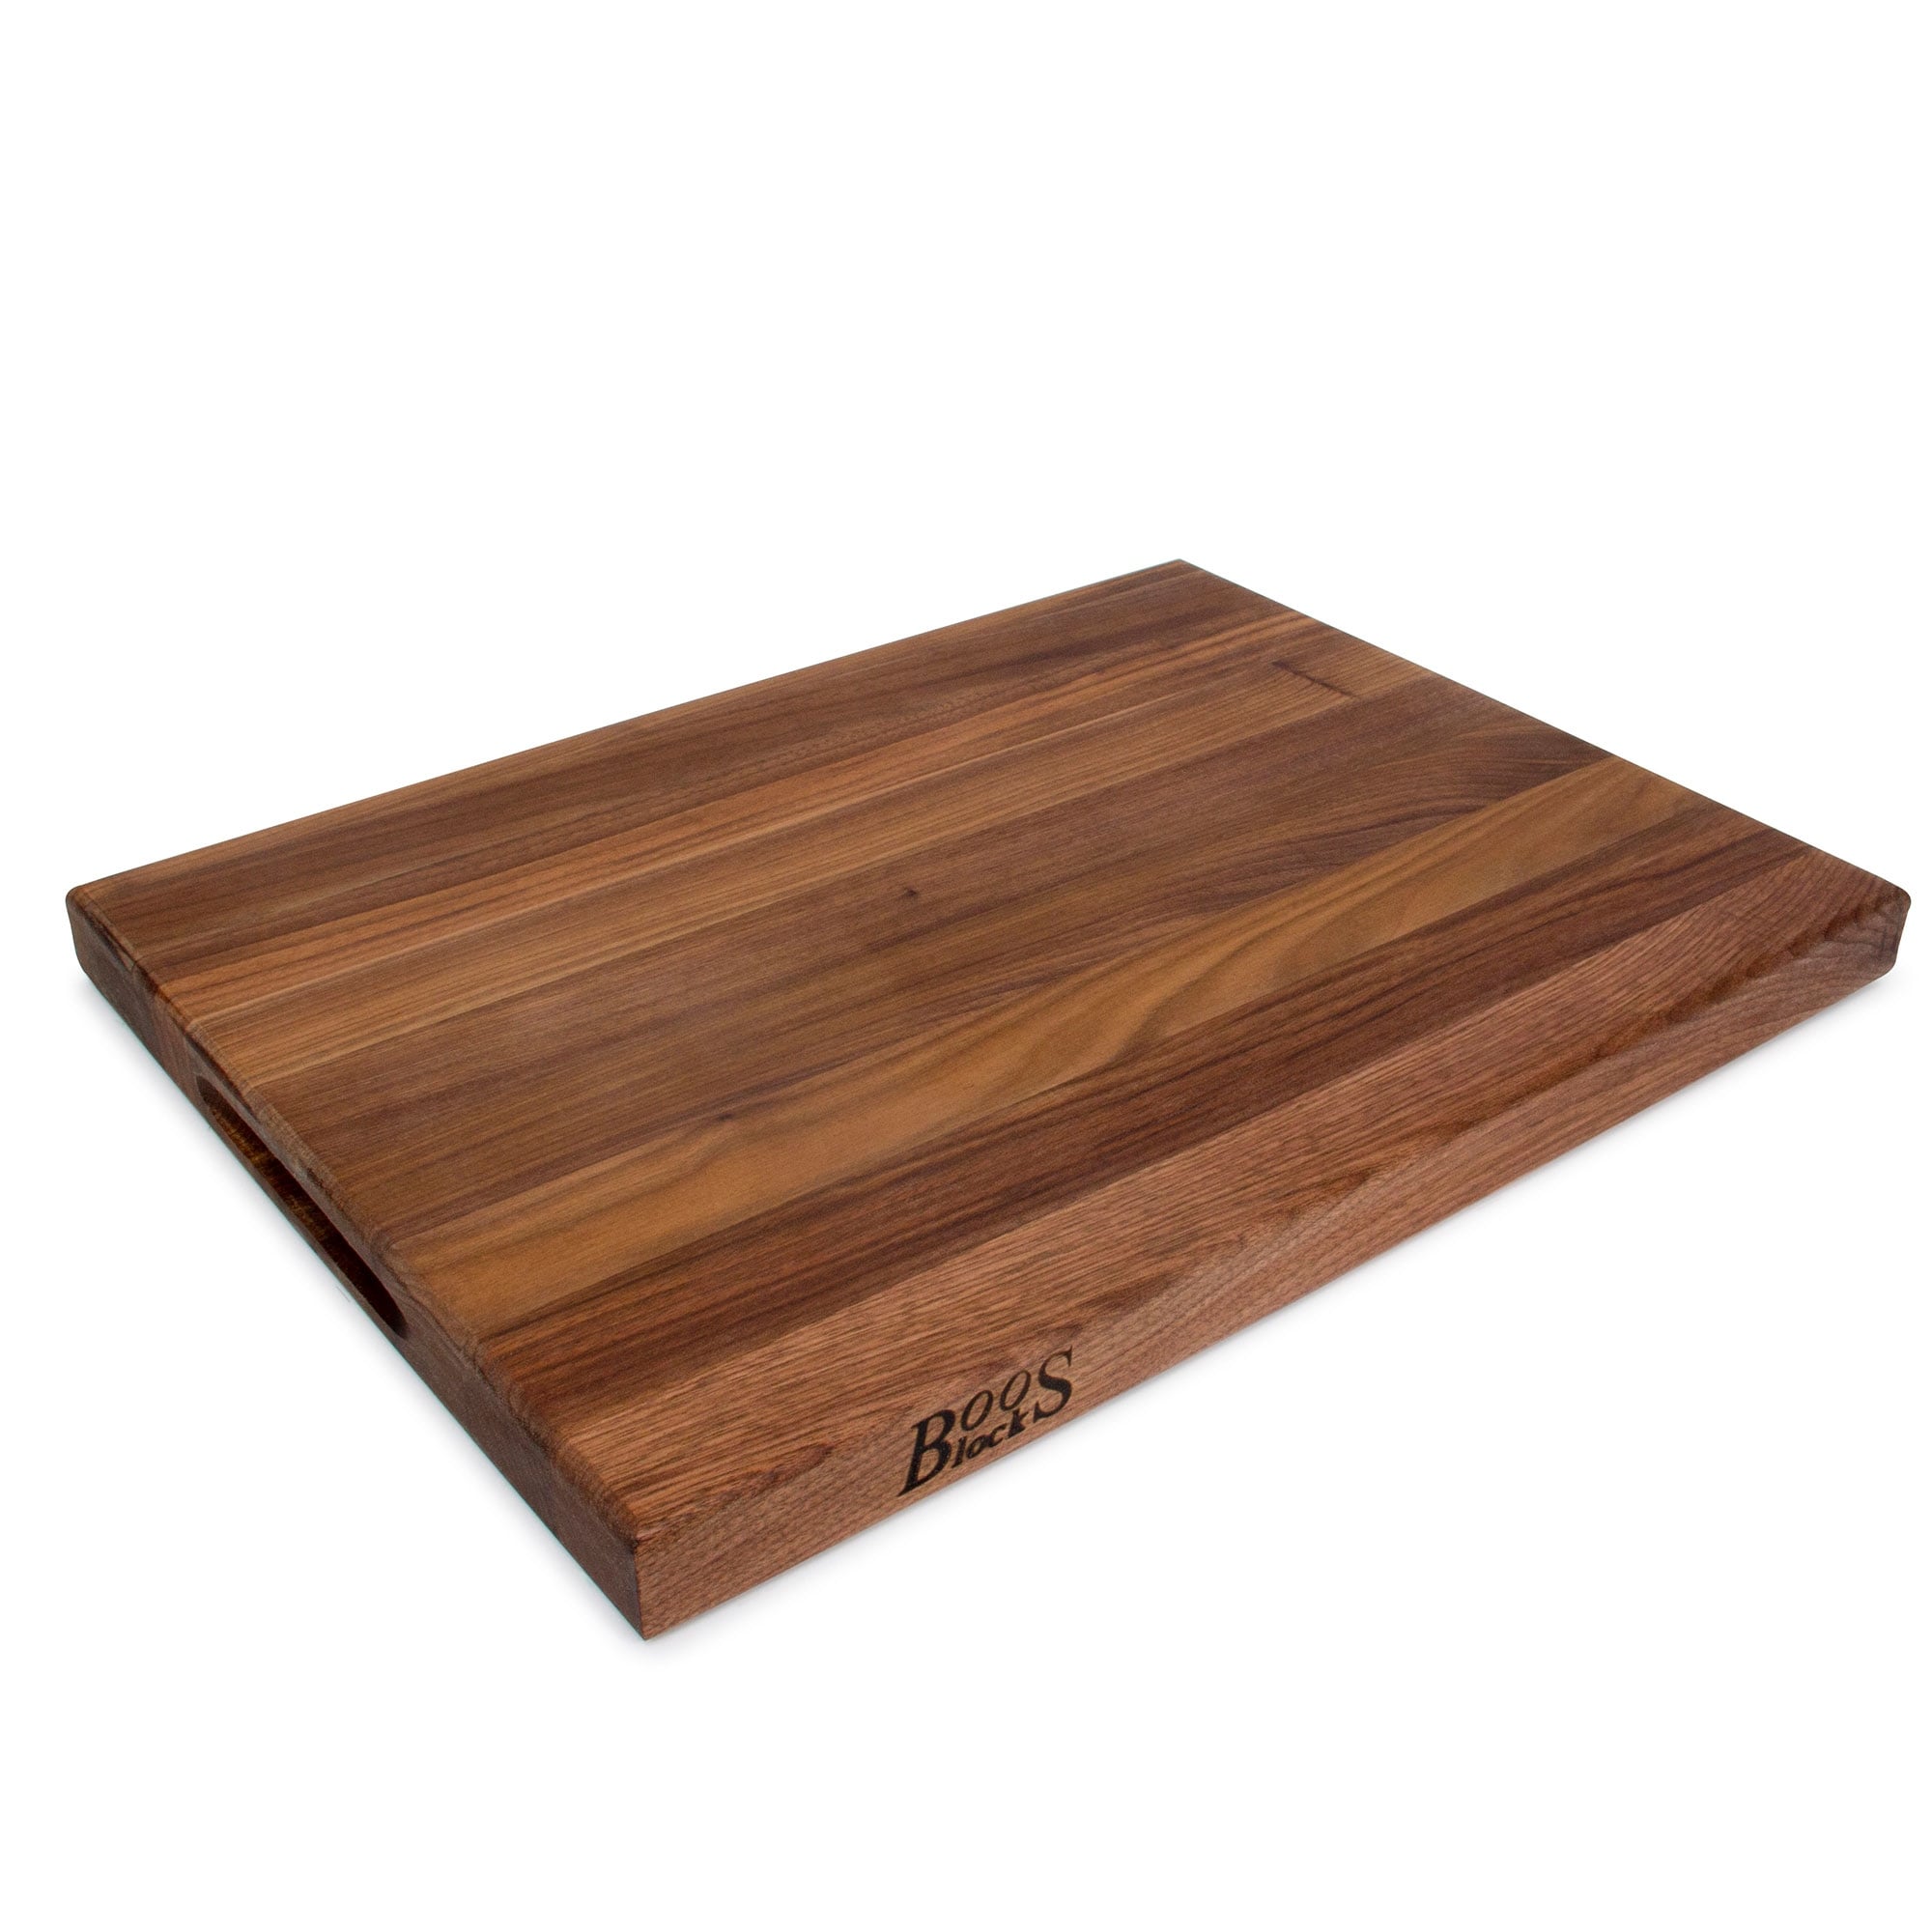 https://ak1.ostkcdn.com/images/products/is/images/direct/f4426e9e600bf590f1268963965ef79f8c7e9c50/John-Boos-Walnut-Wood-Reversible-Cutting-Board%2C-20-x-15-x-1.5-Inches.jpg